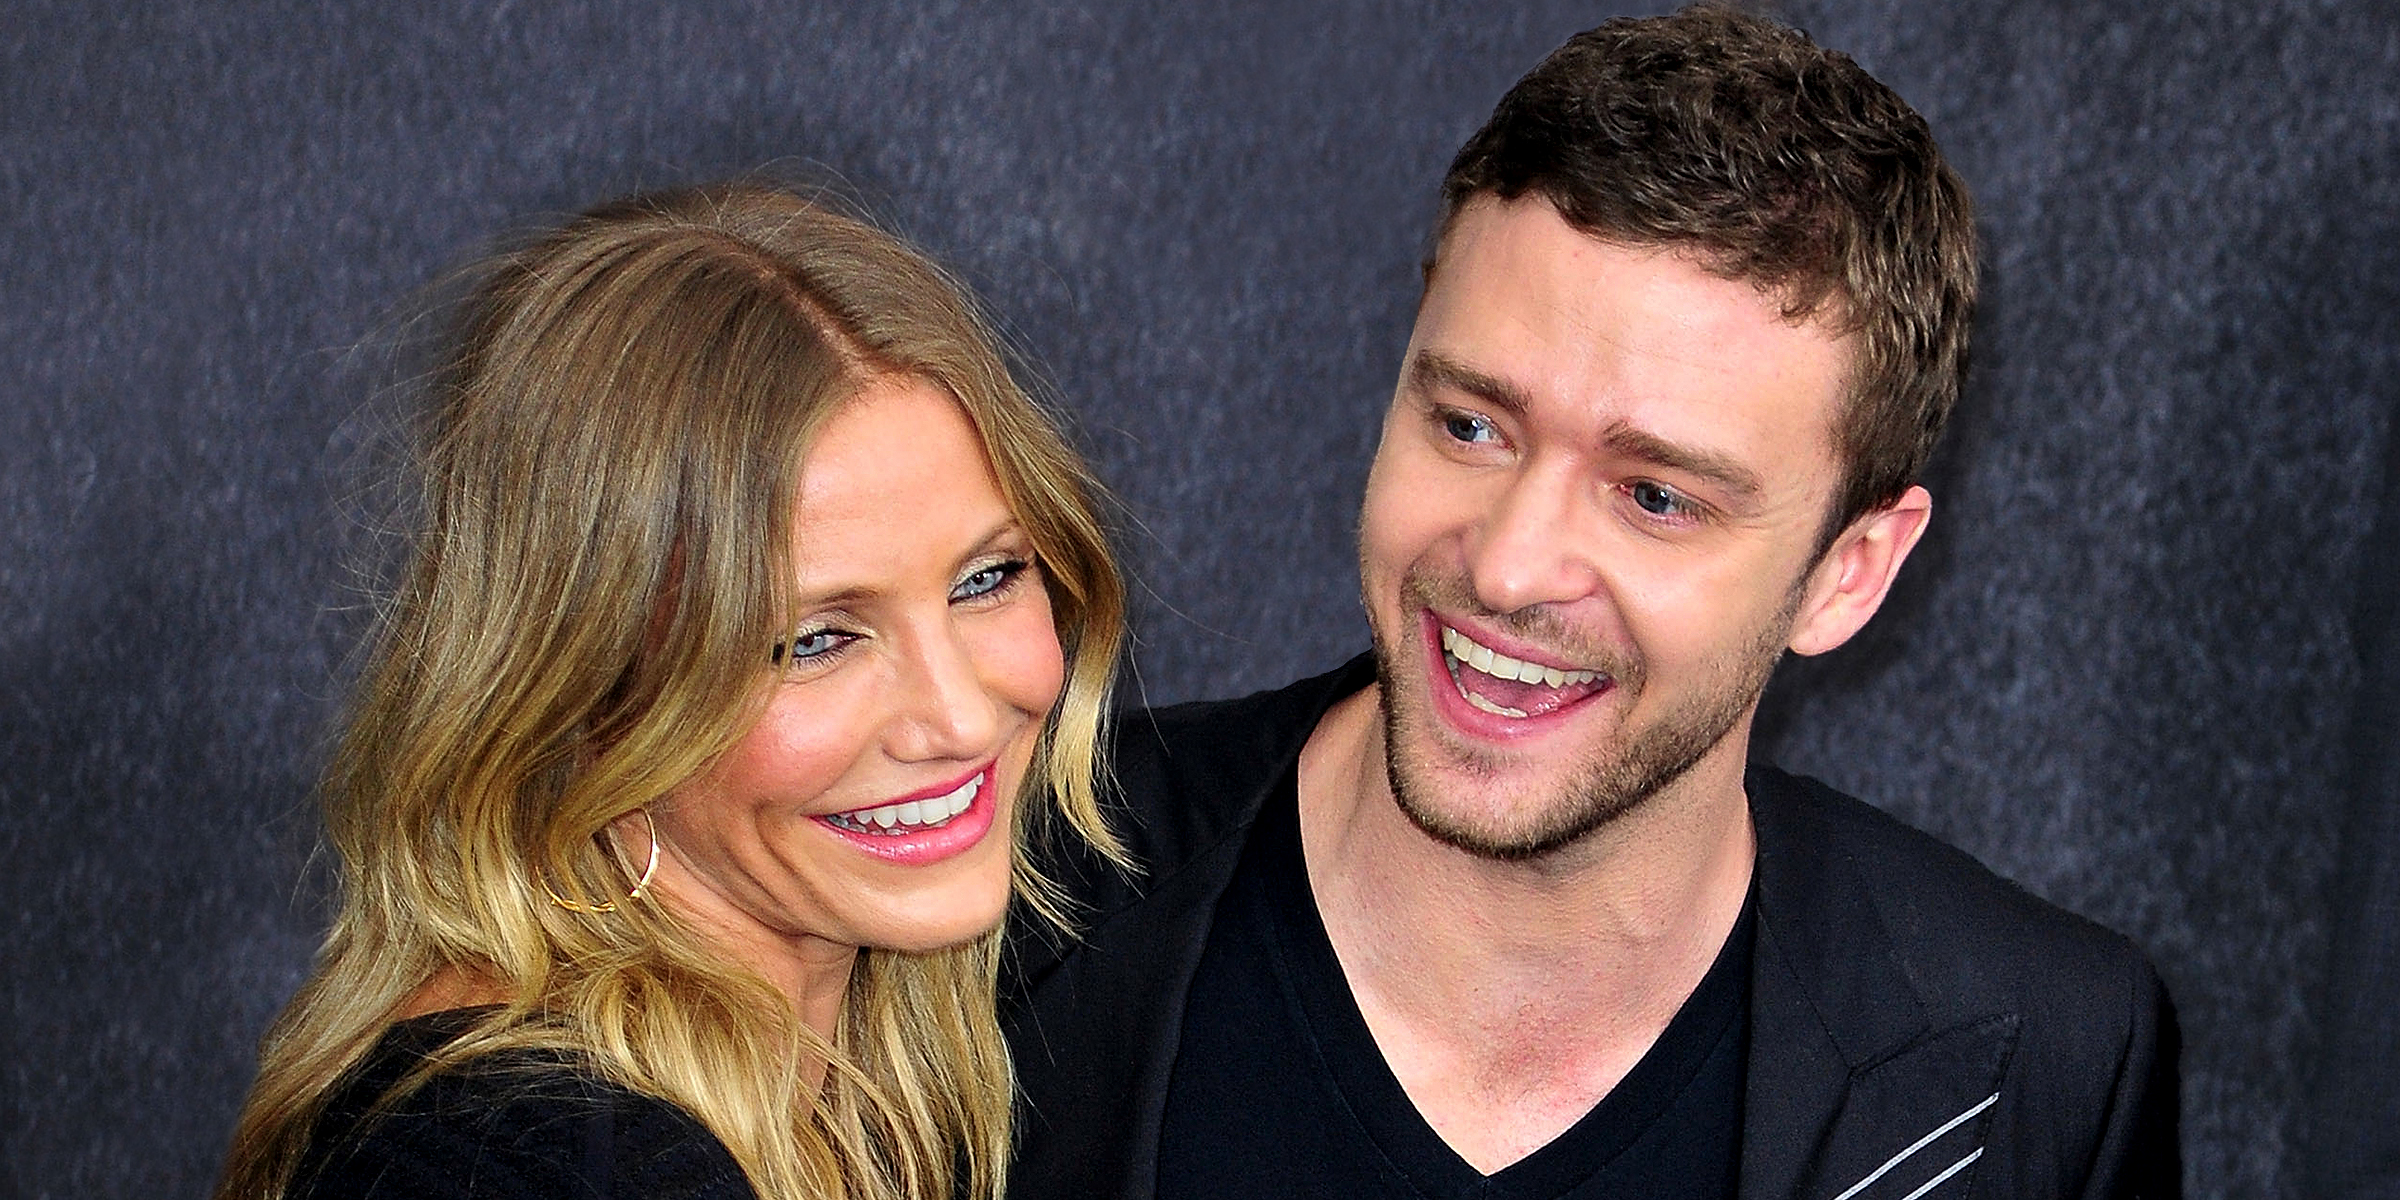 Cameron Diaz et Justin Timberlake | Source : Getty Images